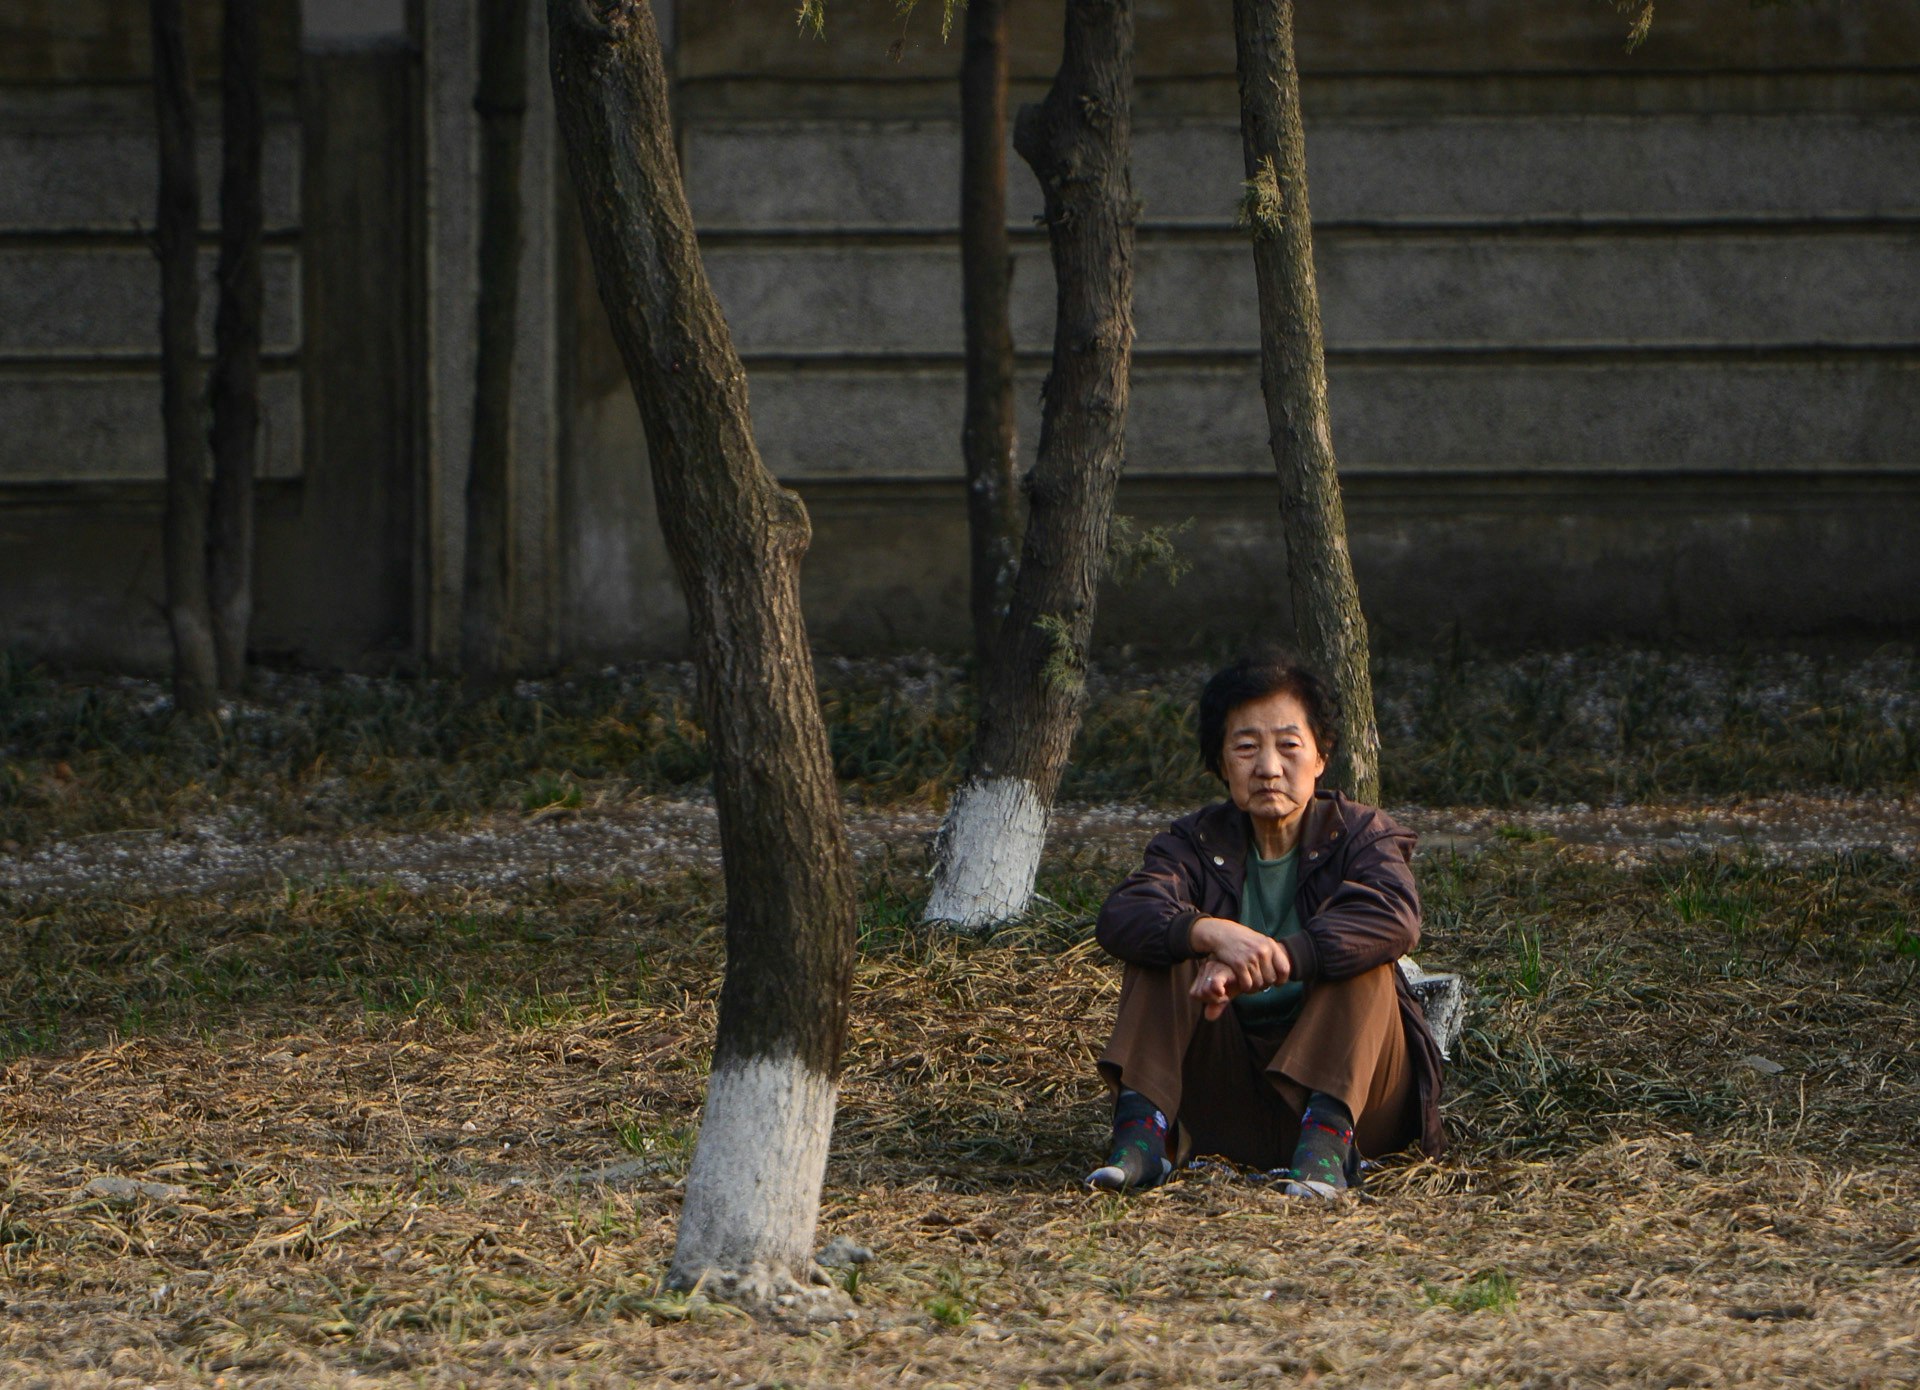 In the suburbs of Pyongyang, a North Korean woman waits.